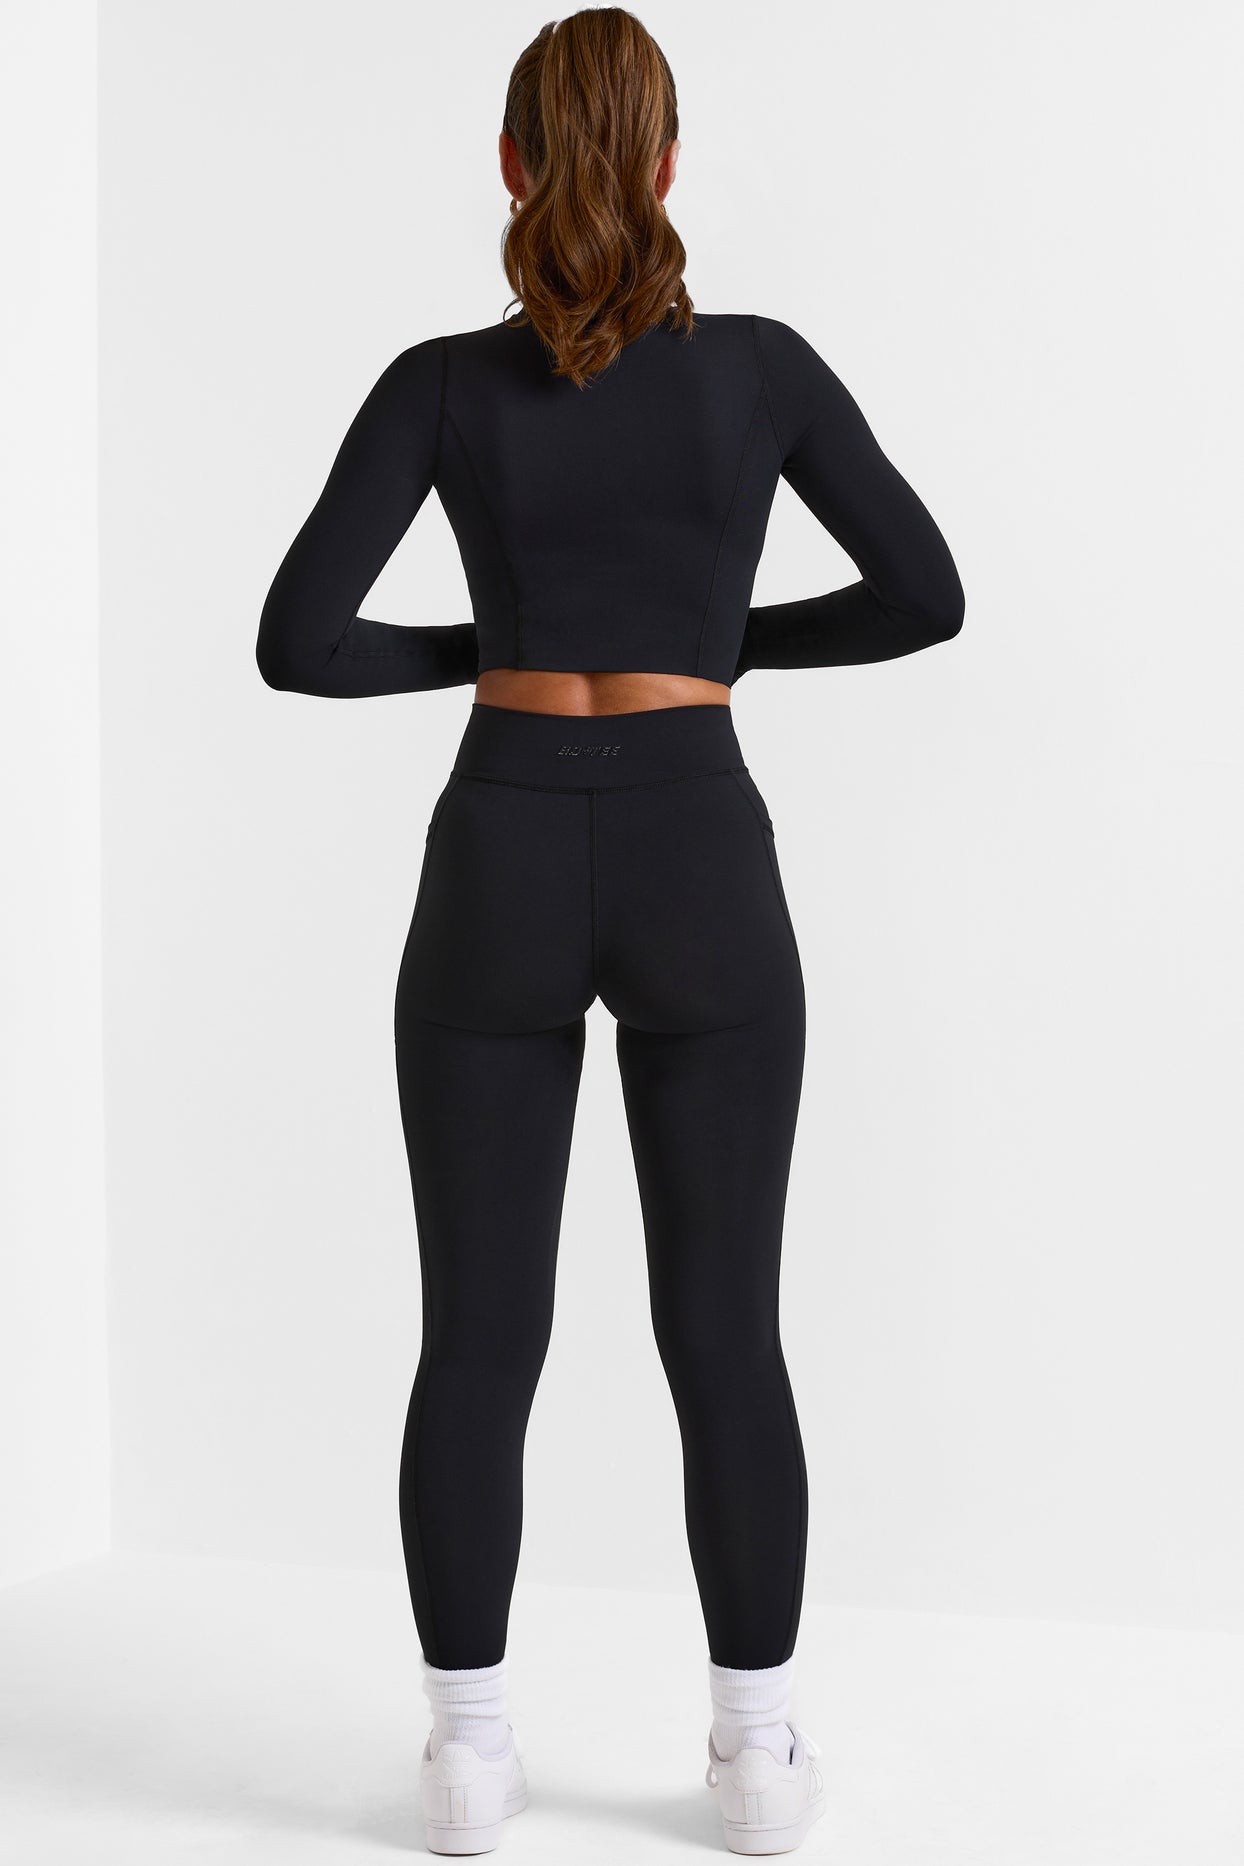 Advantage Full Length Leggings with Pockets in Black | Oh Polly